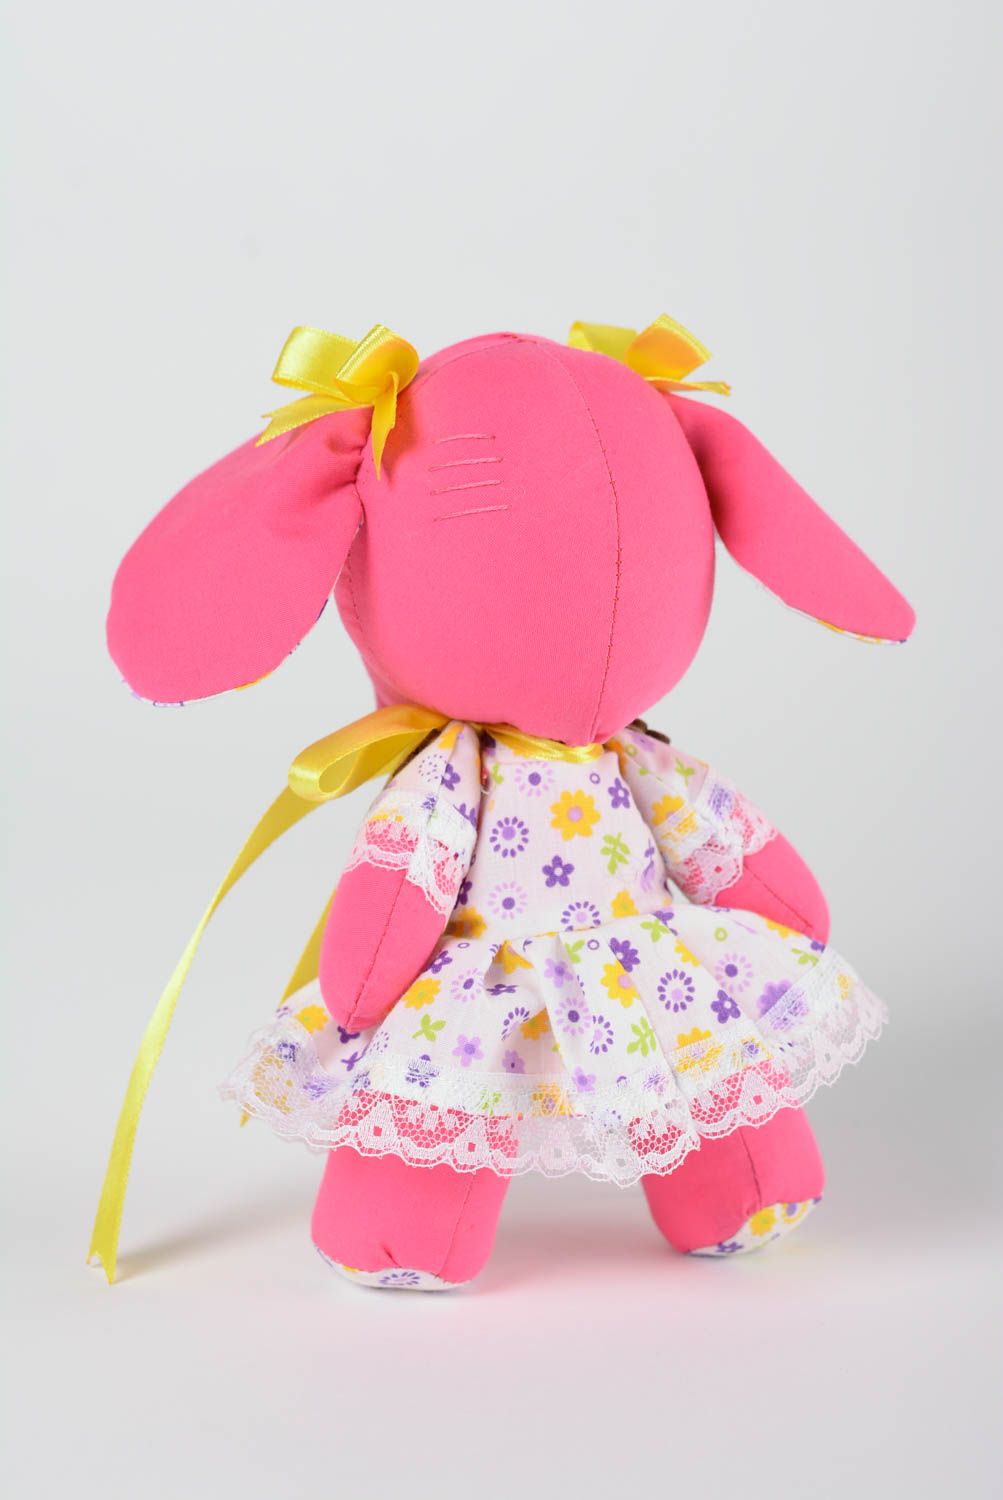 Handmade cotton soft toy pink elephant in floral dress with yellow ribbons photo 4